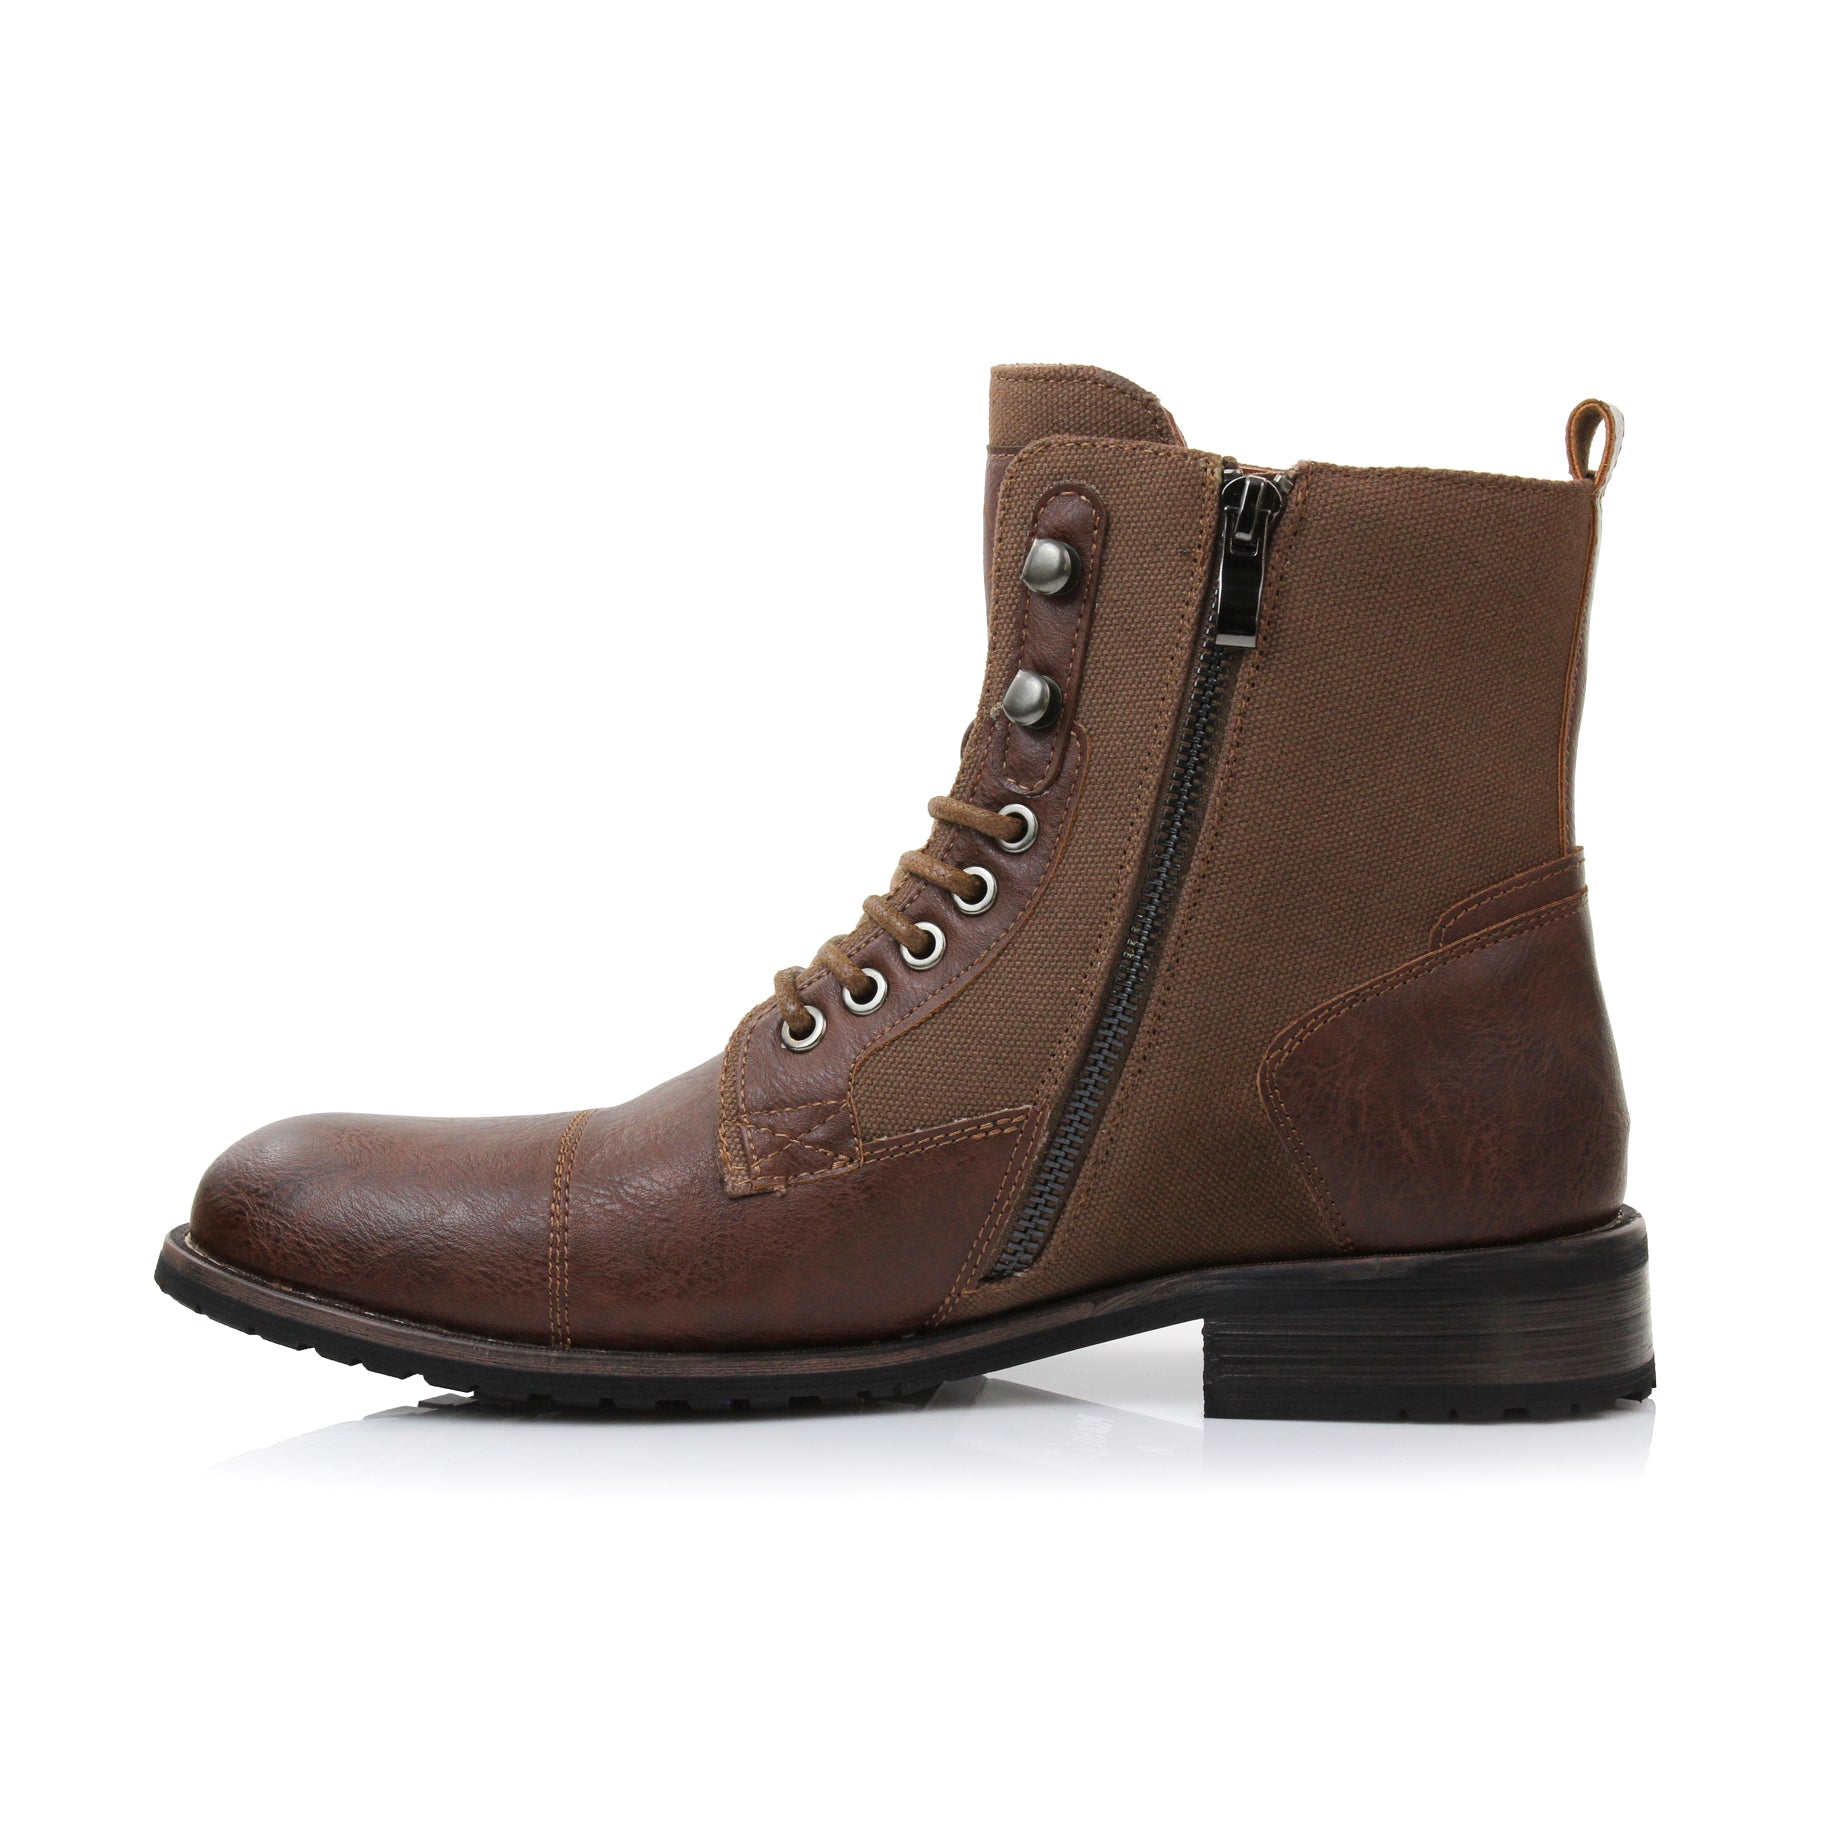 Duo-Textured Combat Boots | Mitch by Polar Fox | Conal Footwear | Inner Side Angle View